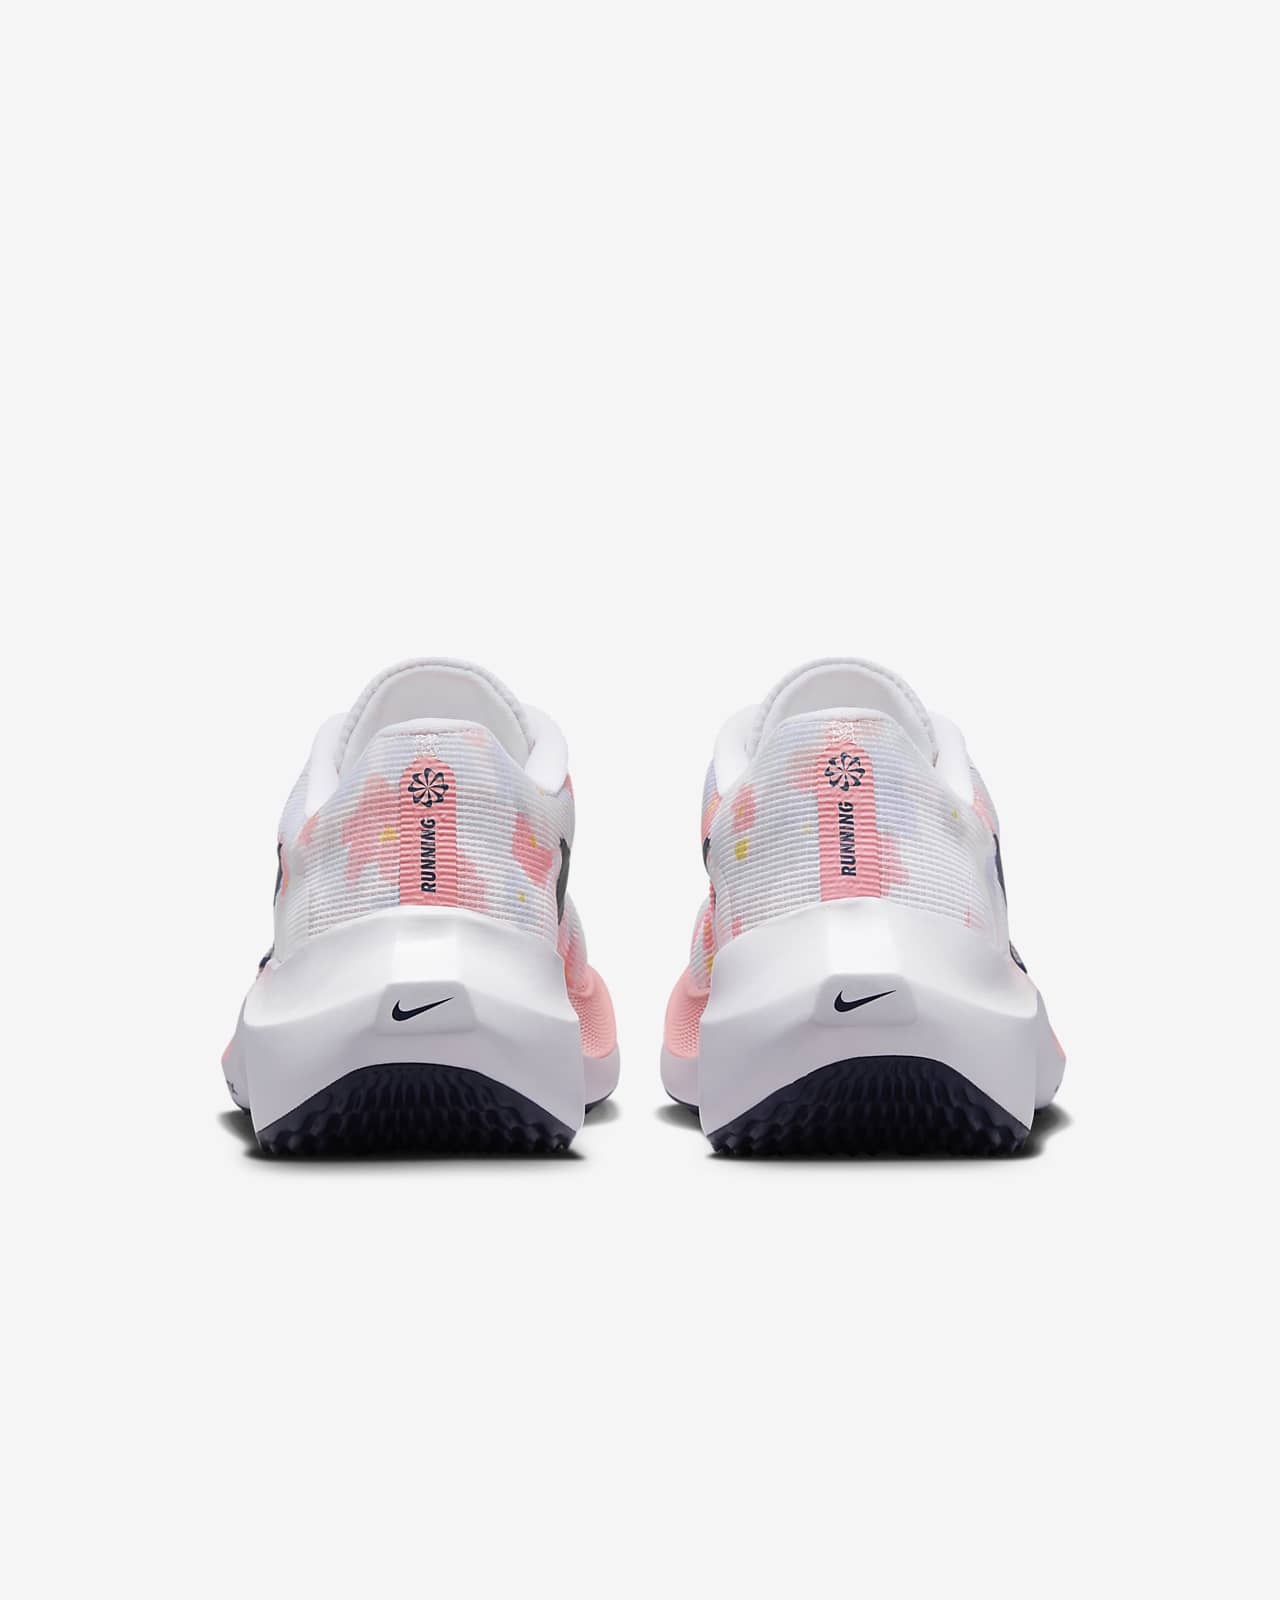 Nike Fly 5 Premium Women's Road Shoes. ID